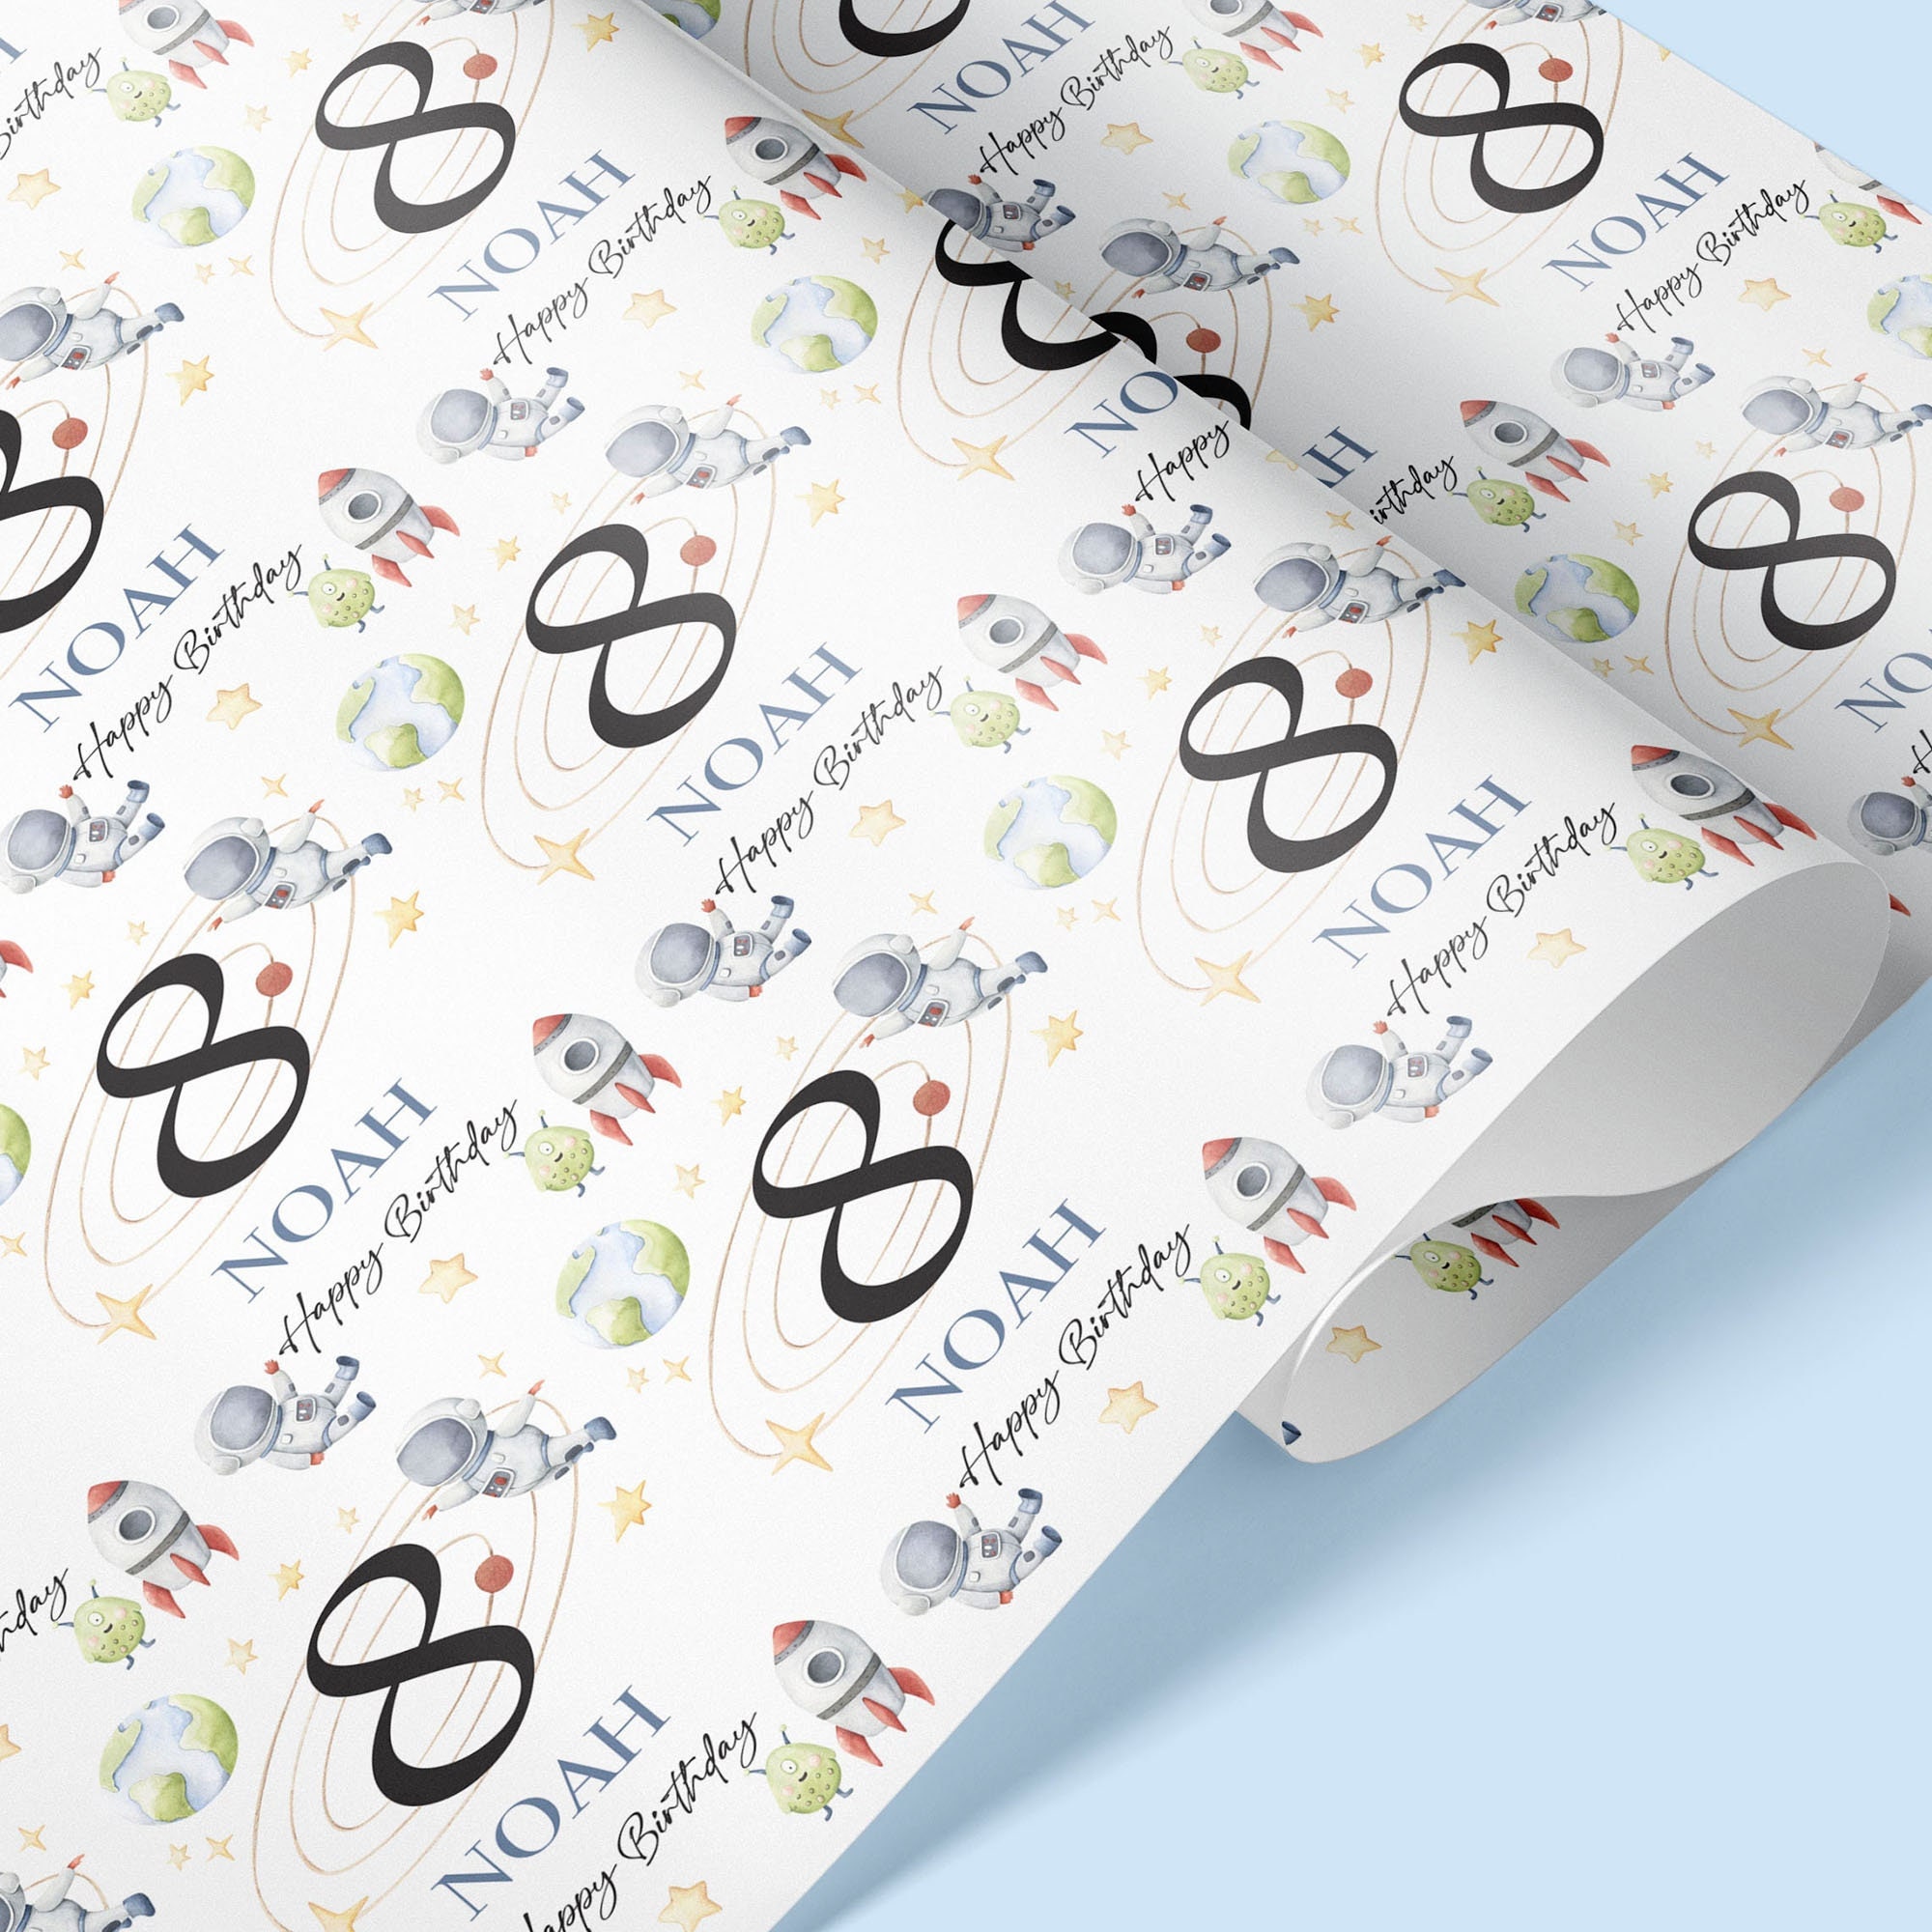 Book Gift Wrap Book Gifts for Book Lovers, Book Gifts, Editor